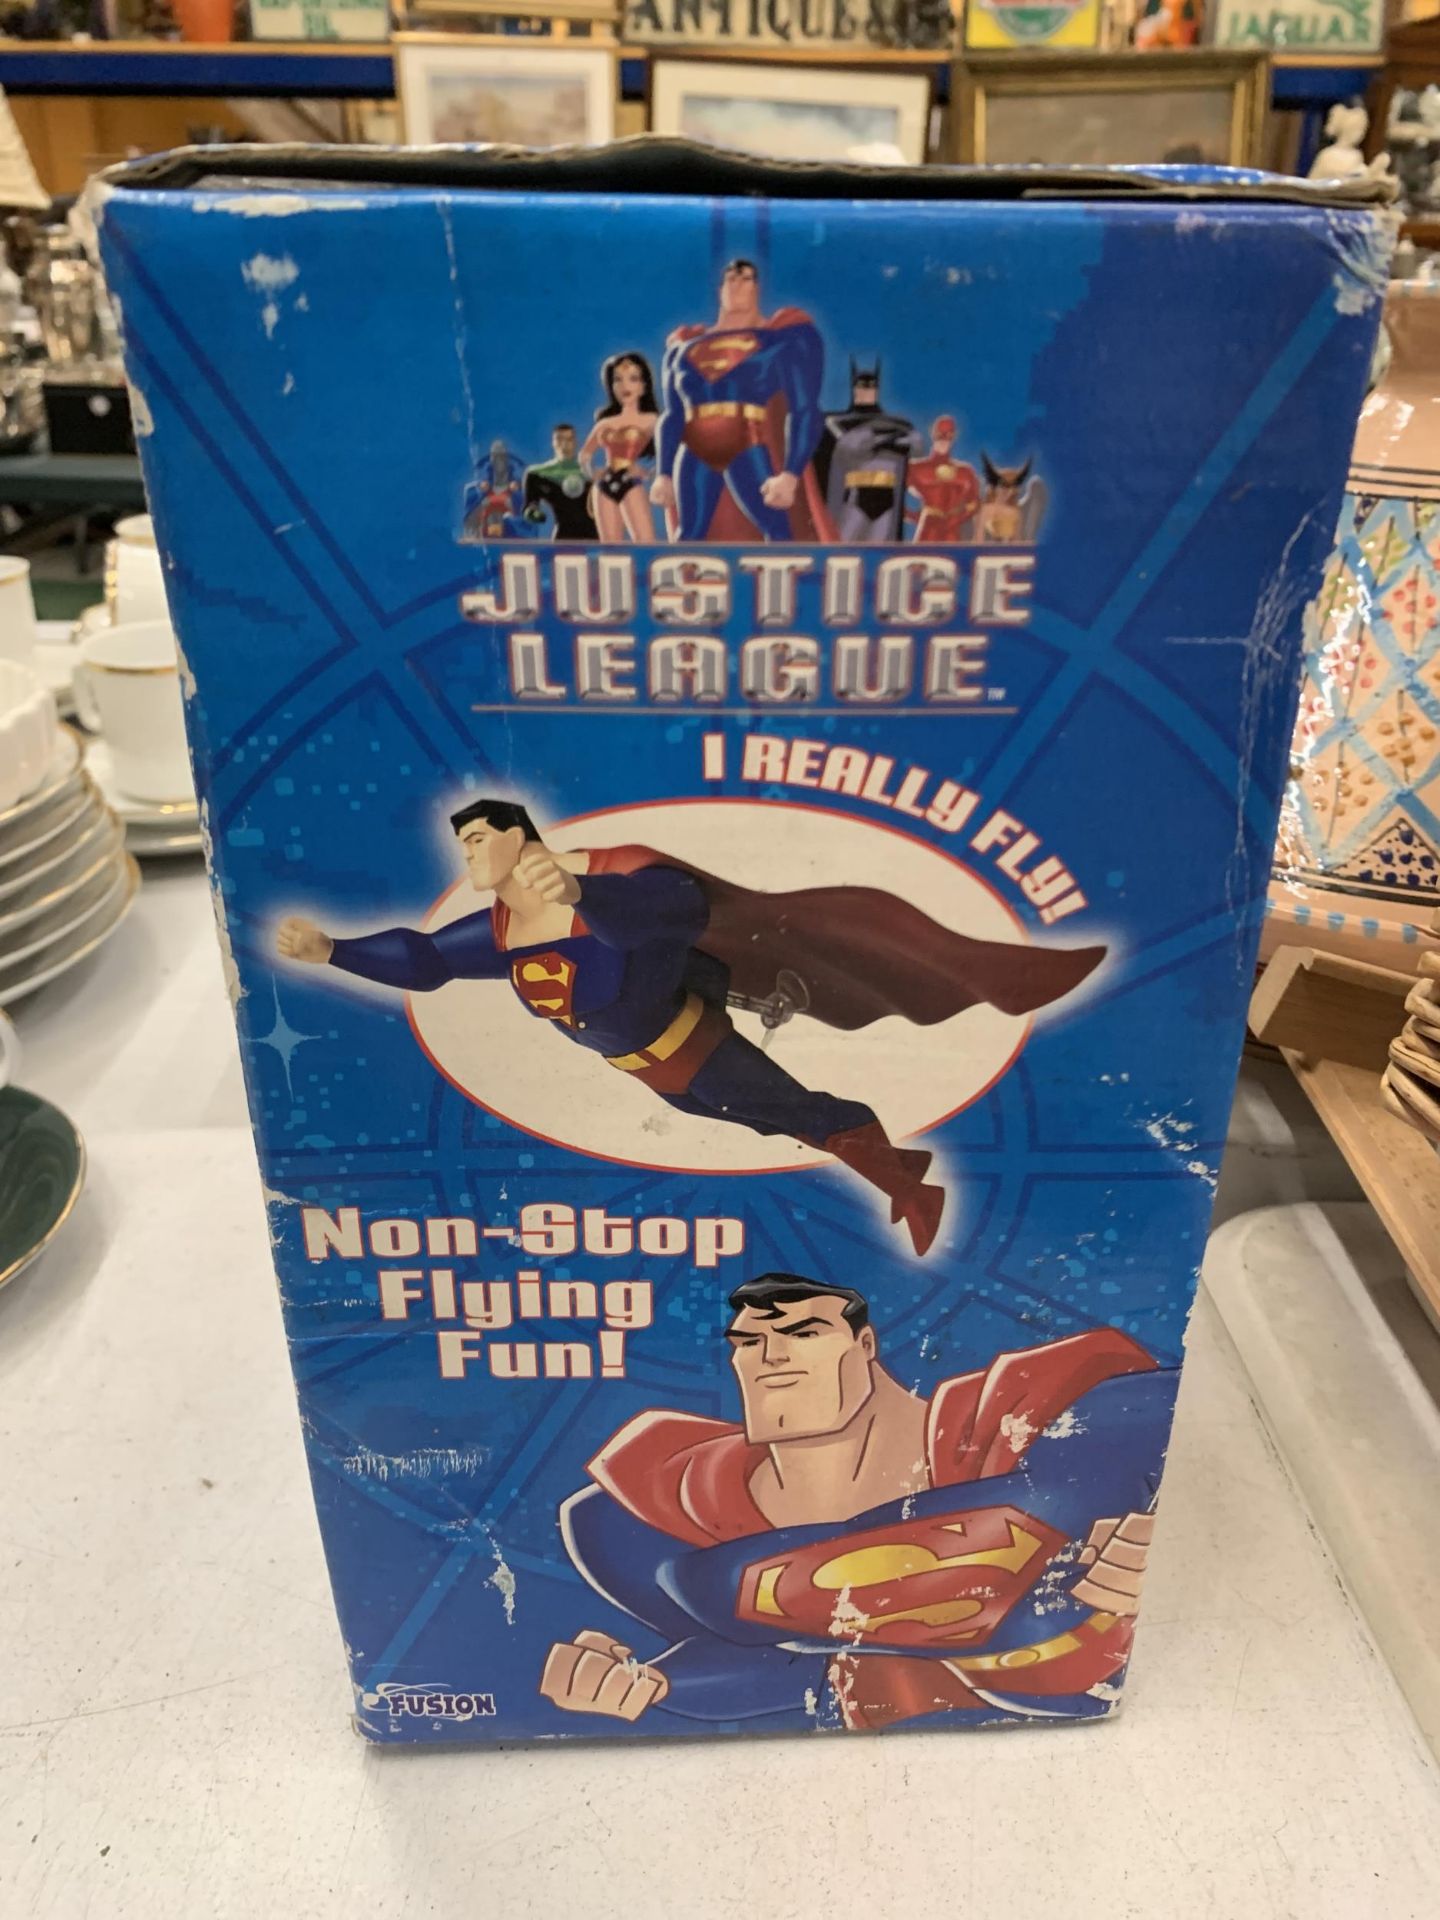 A BOXED JUSTICE LEAGUE FIGURE OF SUPERMAN - Image 2 of 3